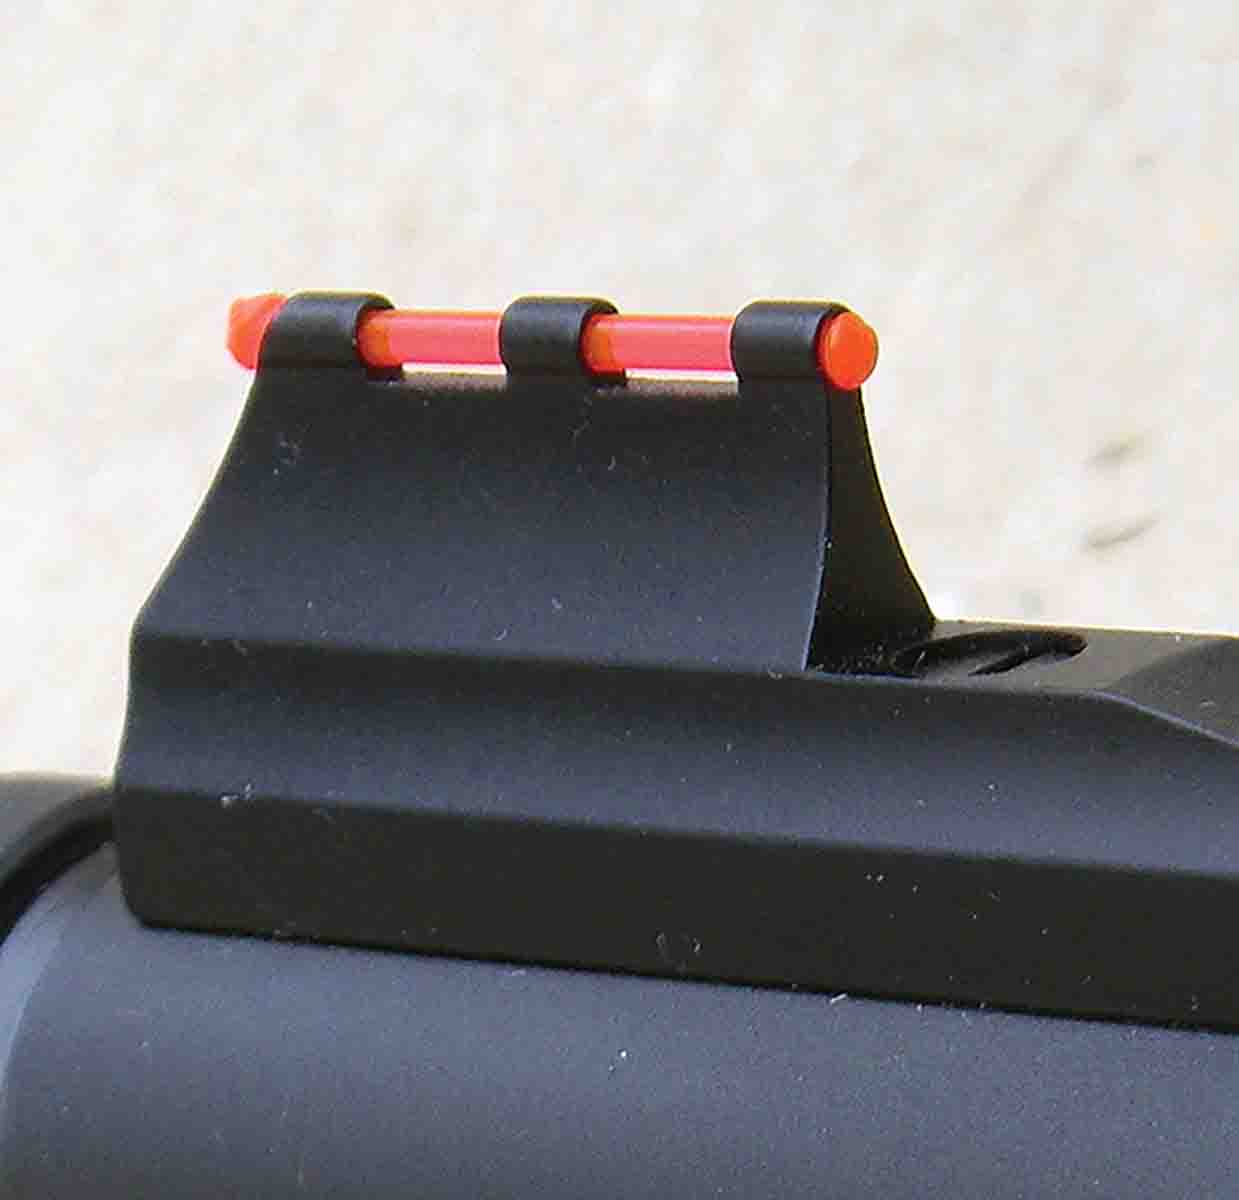 The front sight features a red fiber optic.